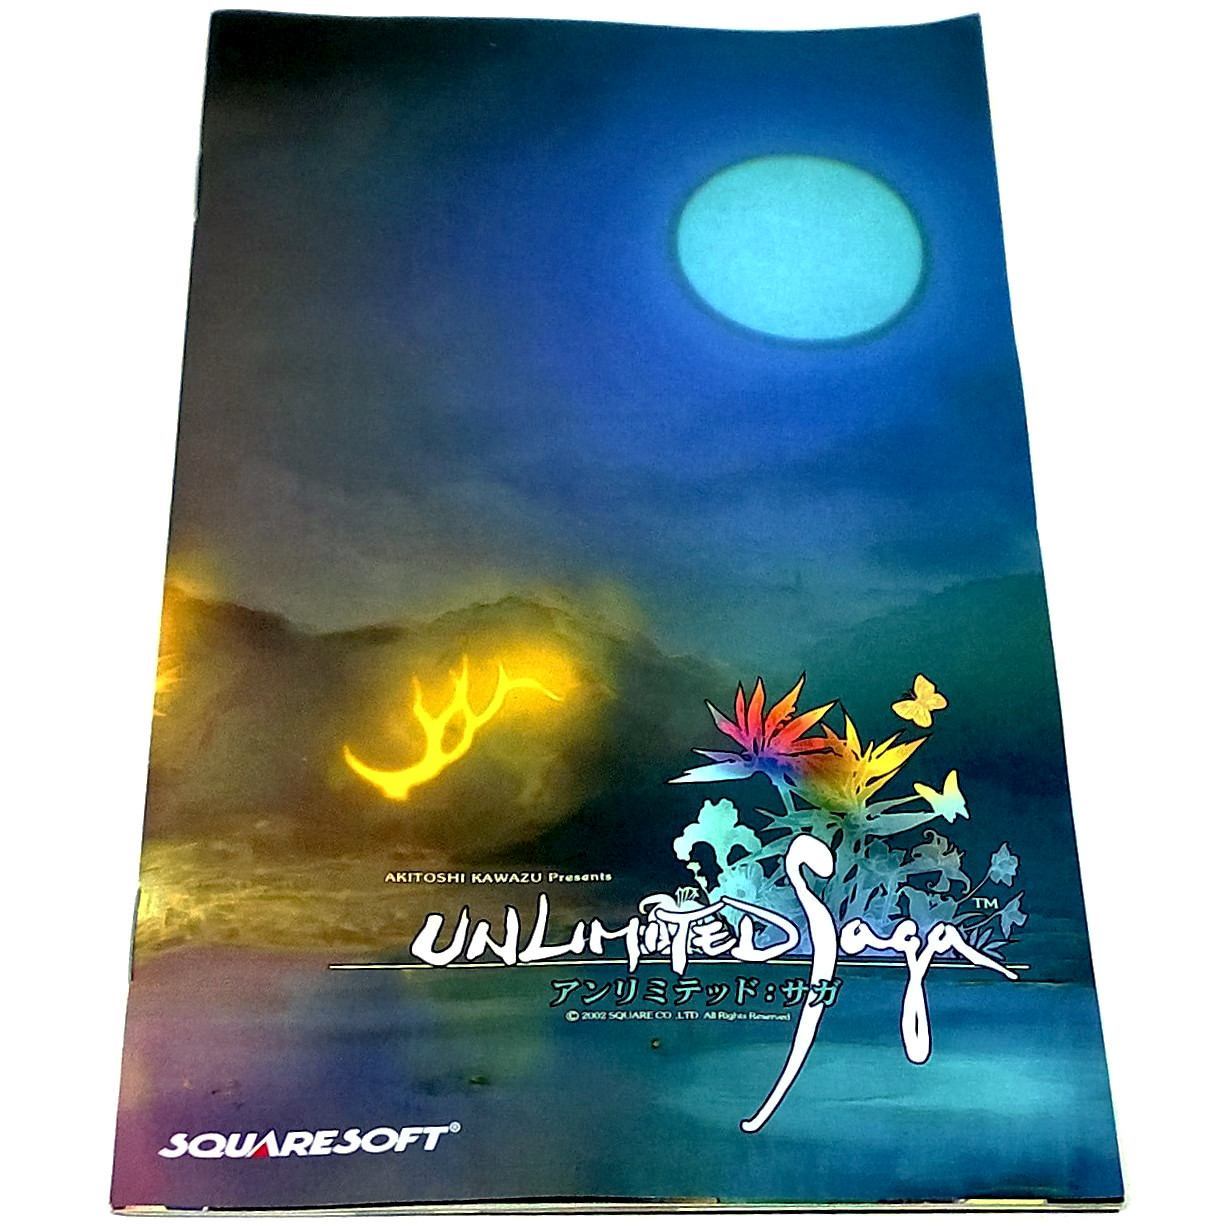 Unlimited SaGa for PlayStation 2 (Import) - Front of manual